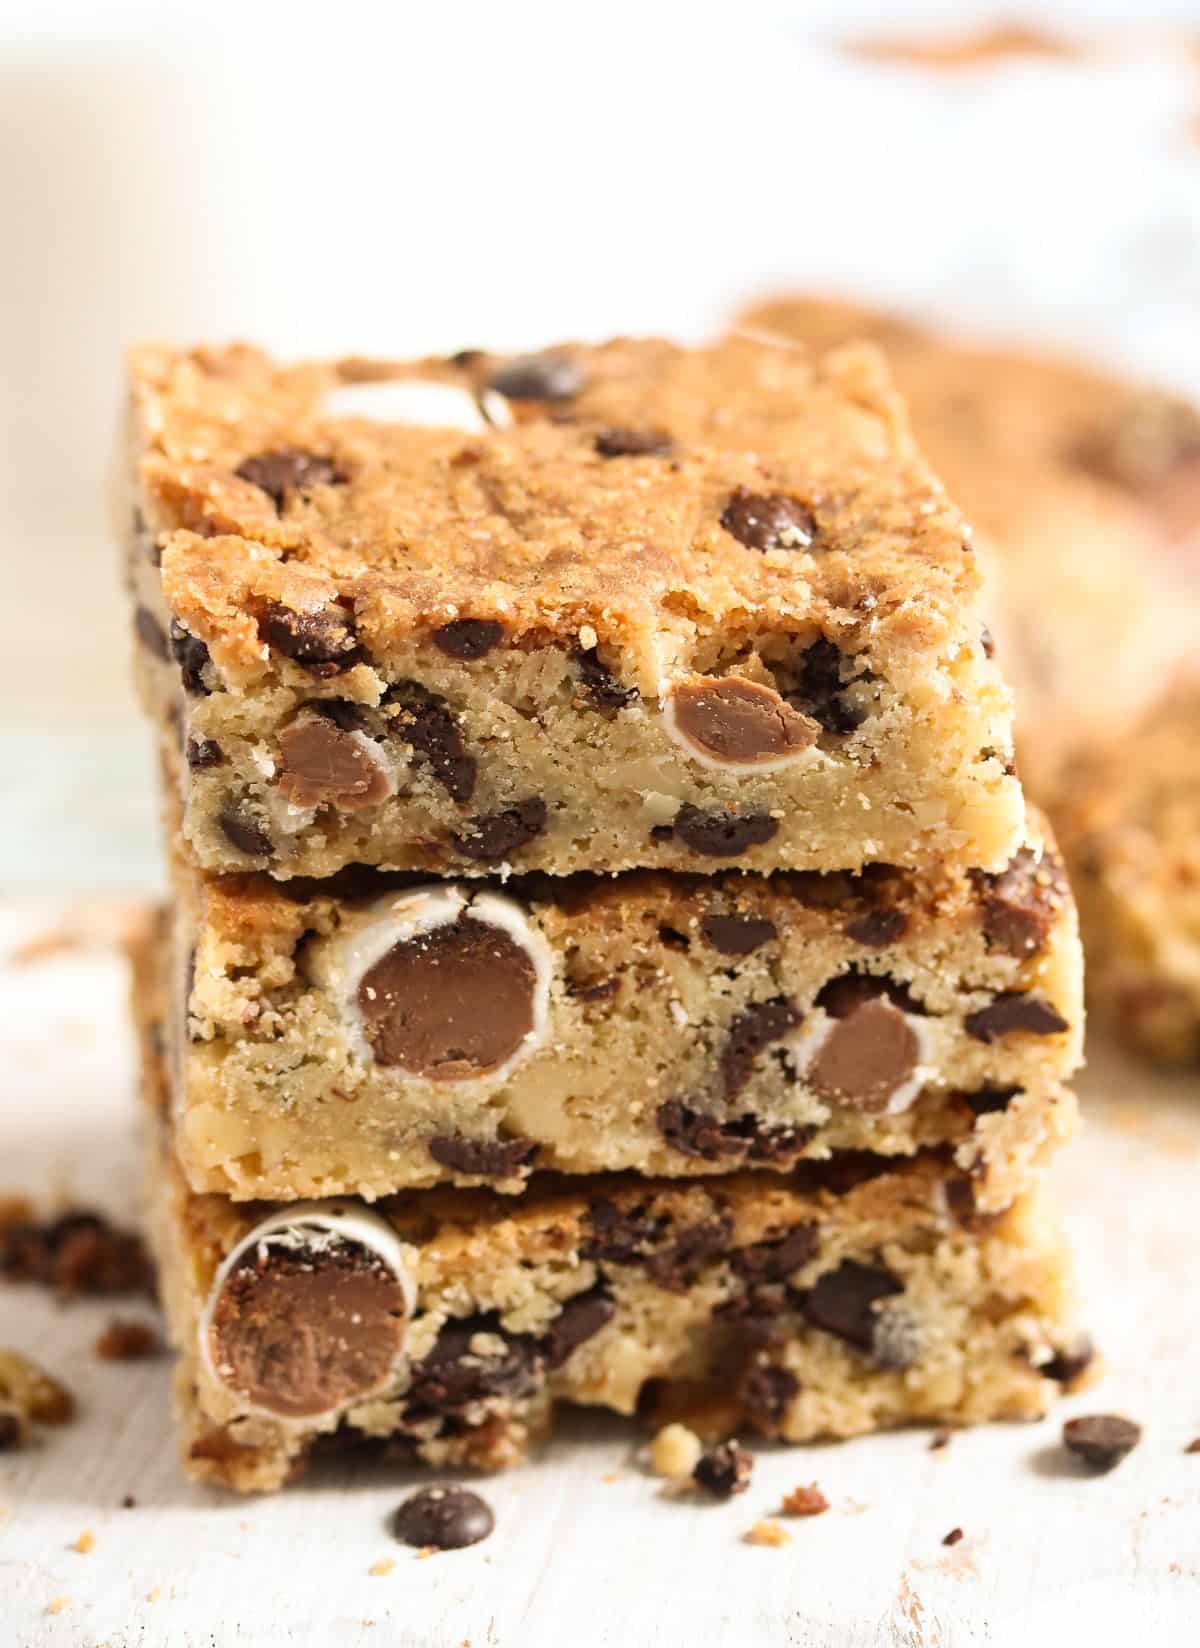 stapled cookie bars with chocolate.